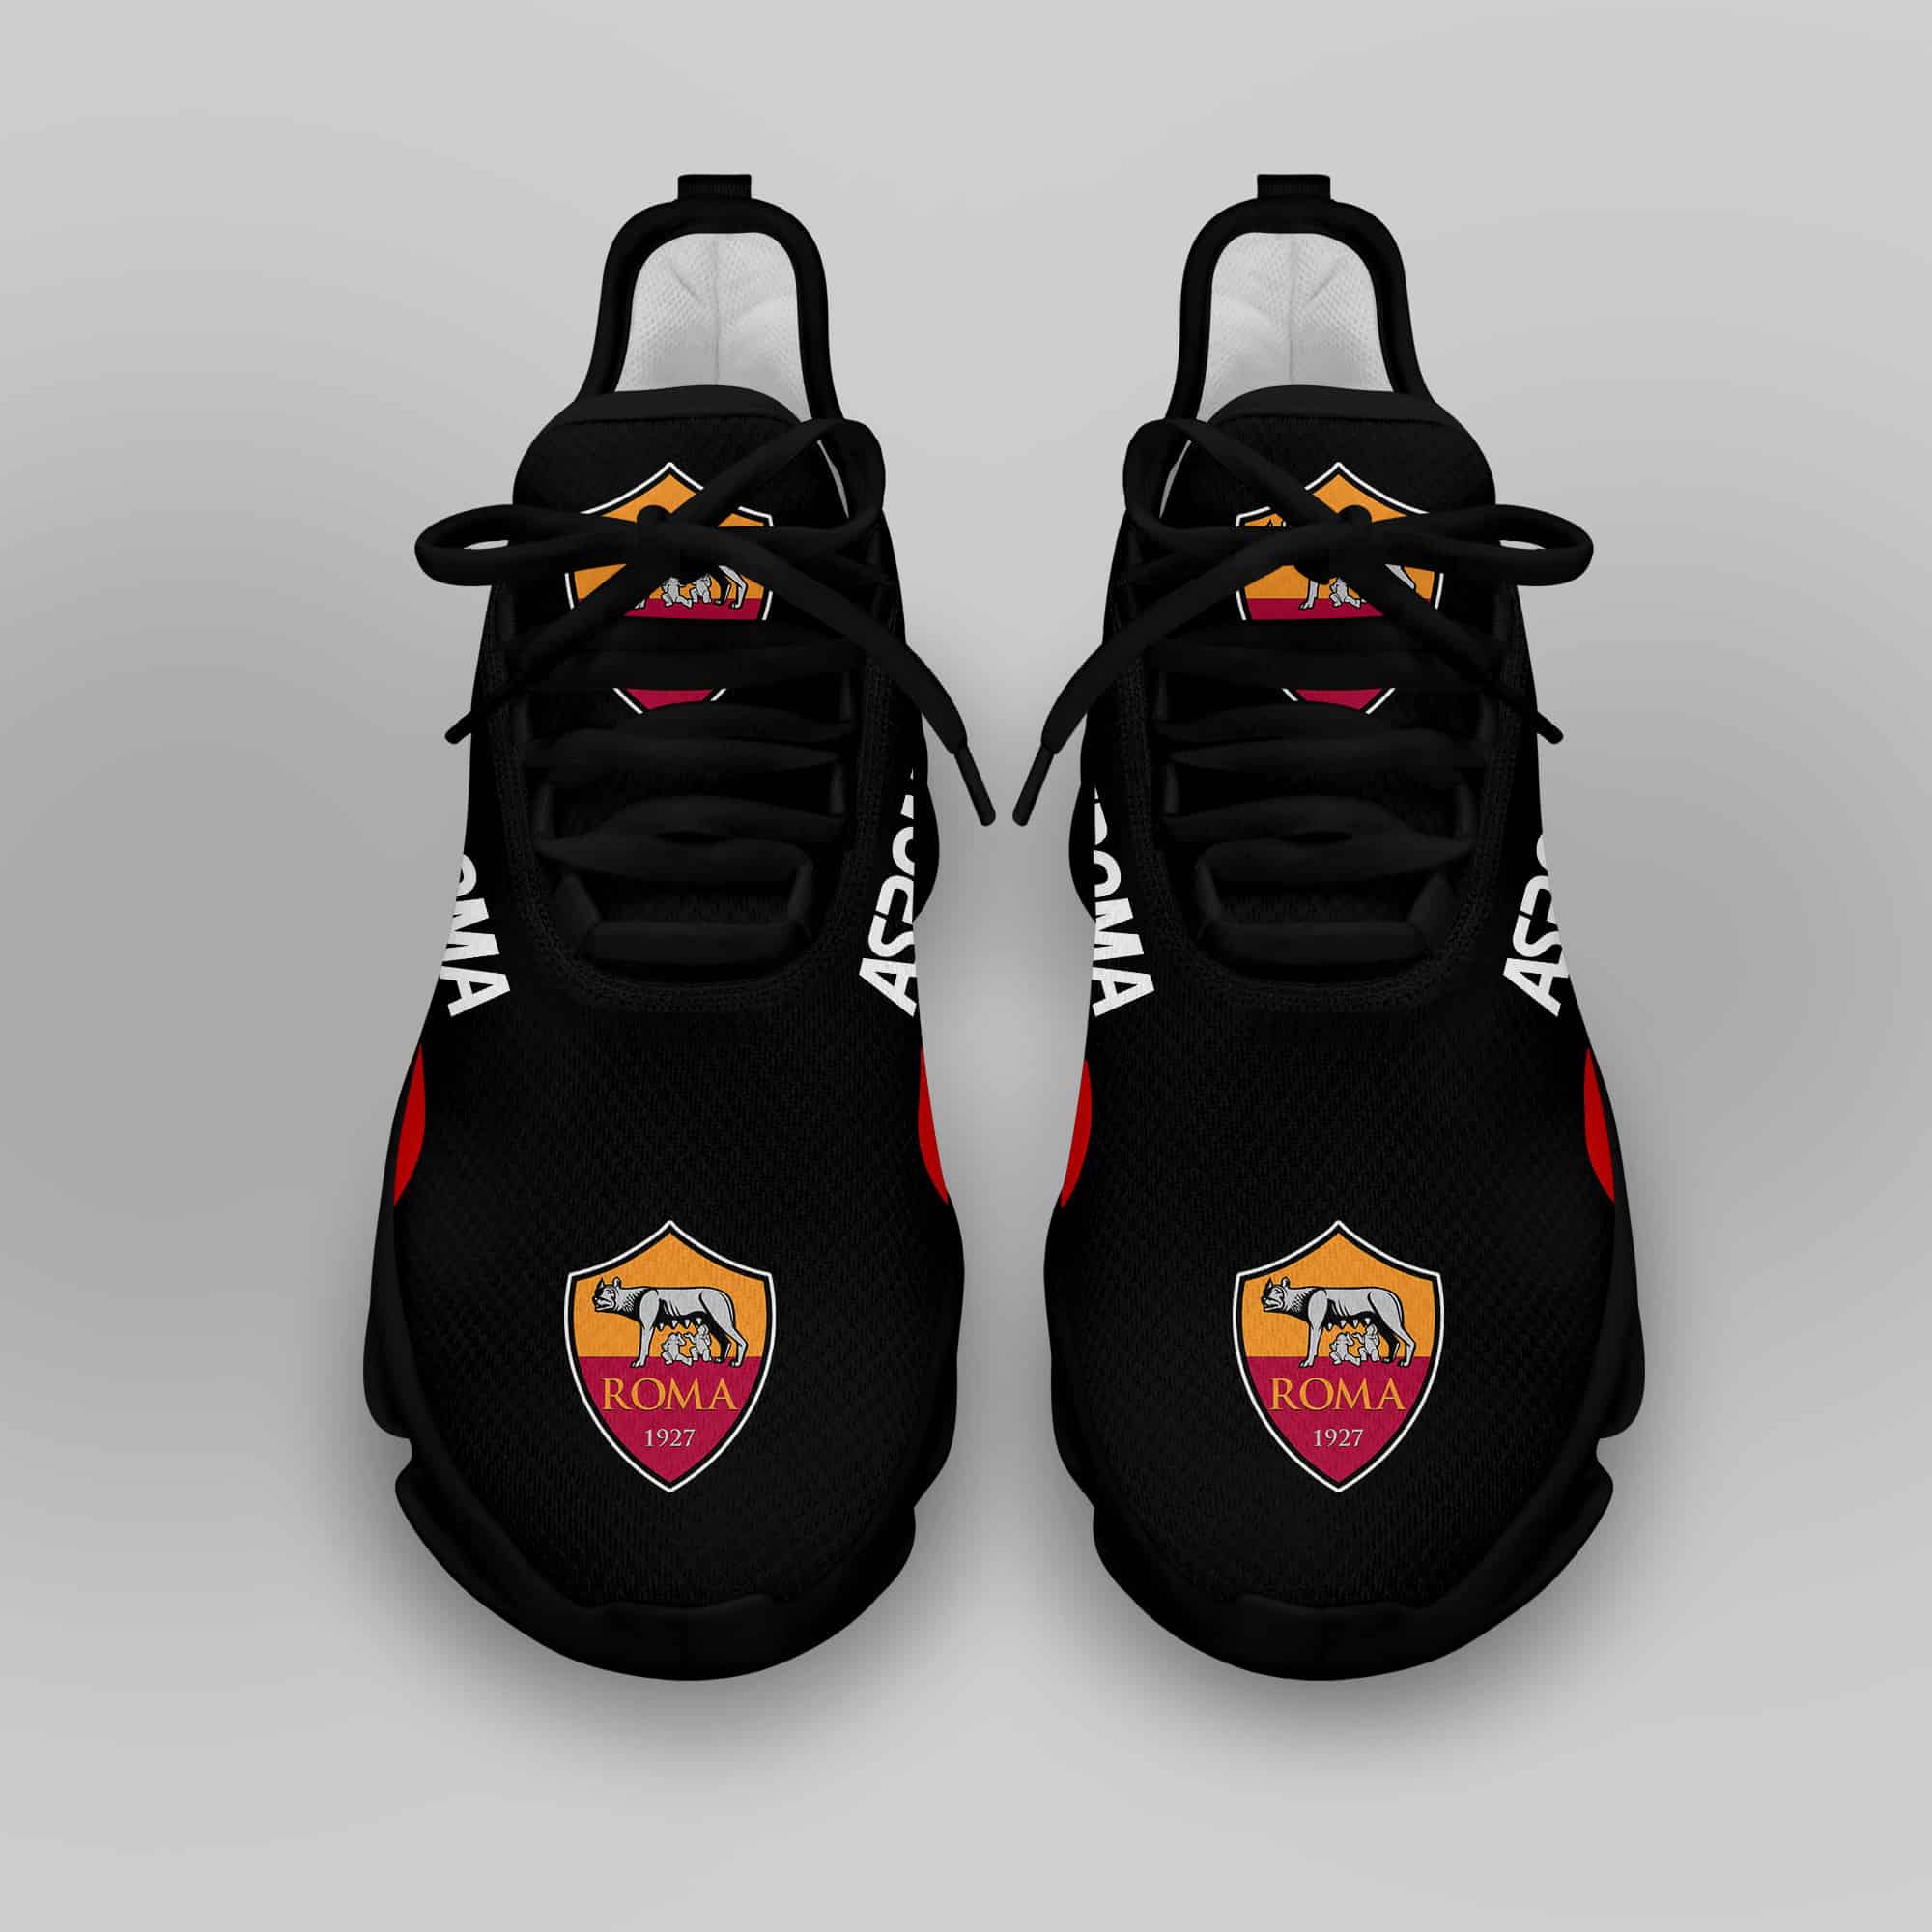 As Roma Running Shoes Max Soul Shoes Sneakers Ver 1 4